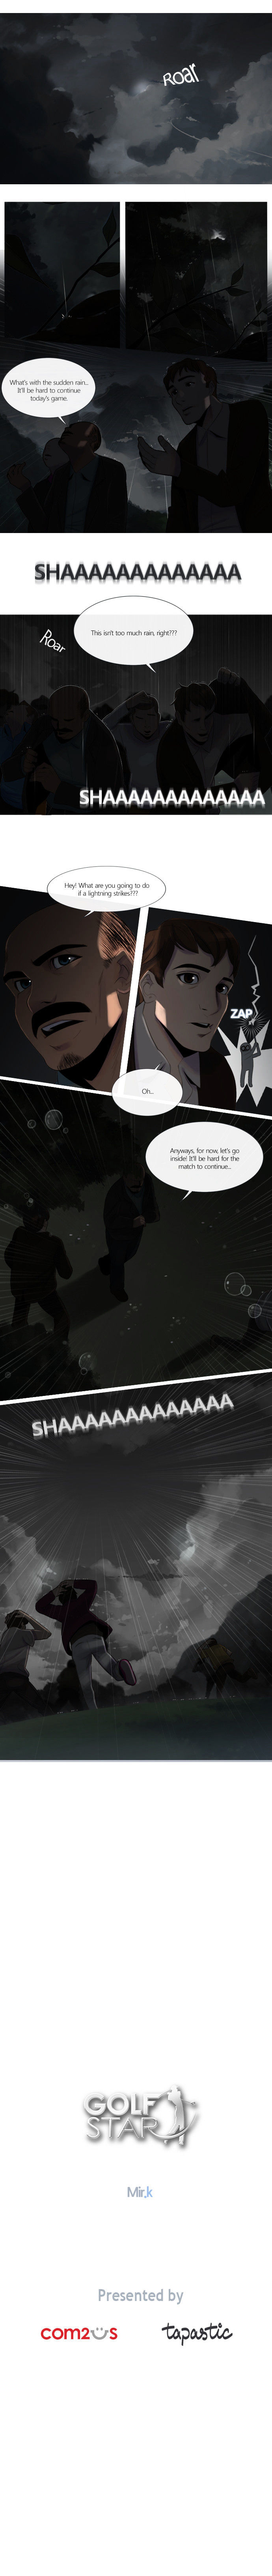 Golf Star Chapter 6 : Panic Attack - Picture 1